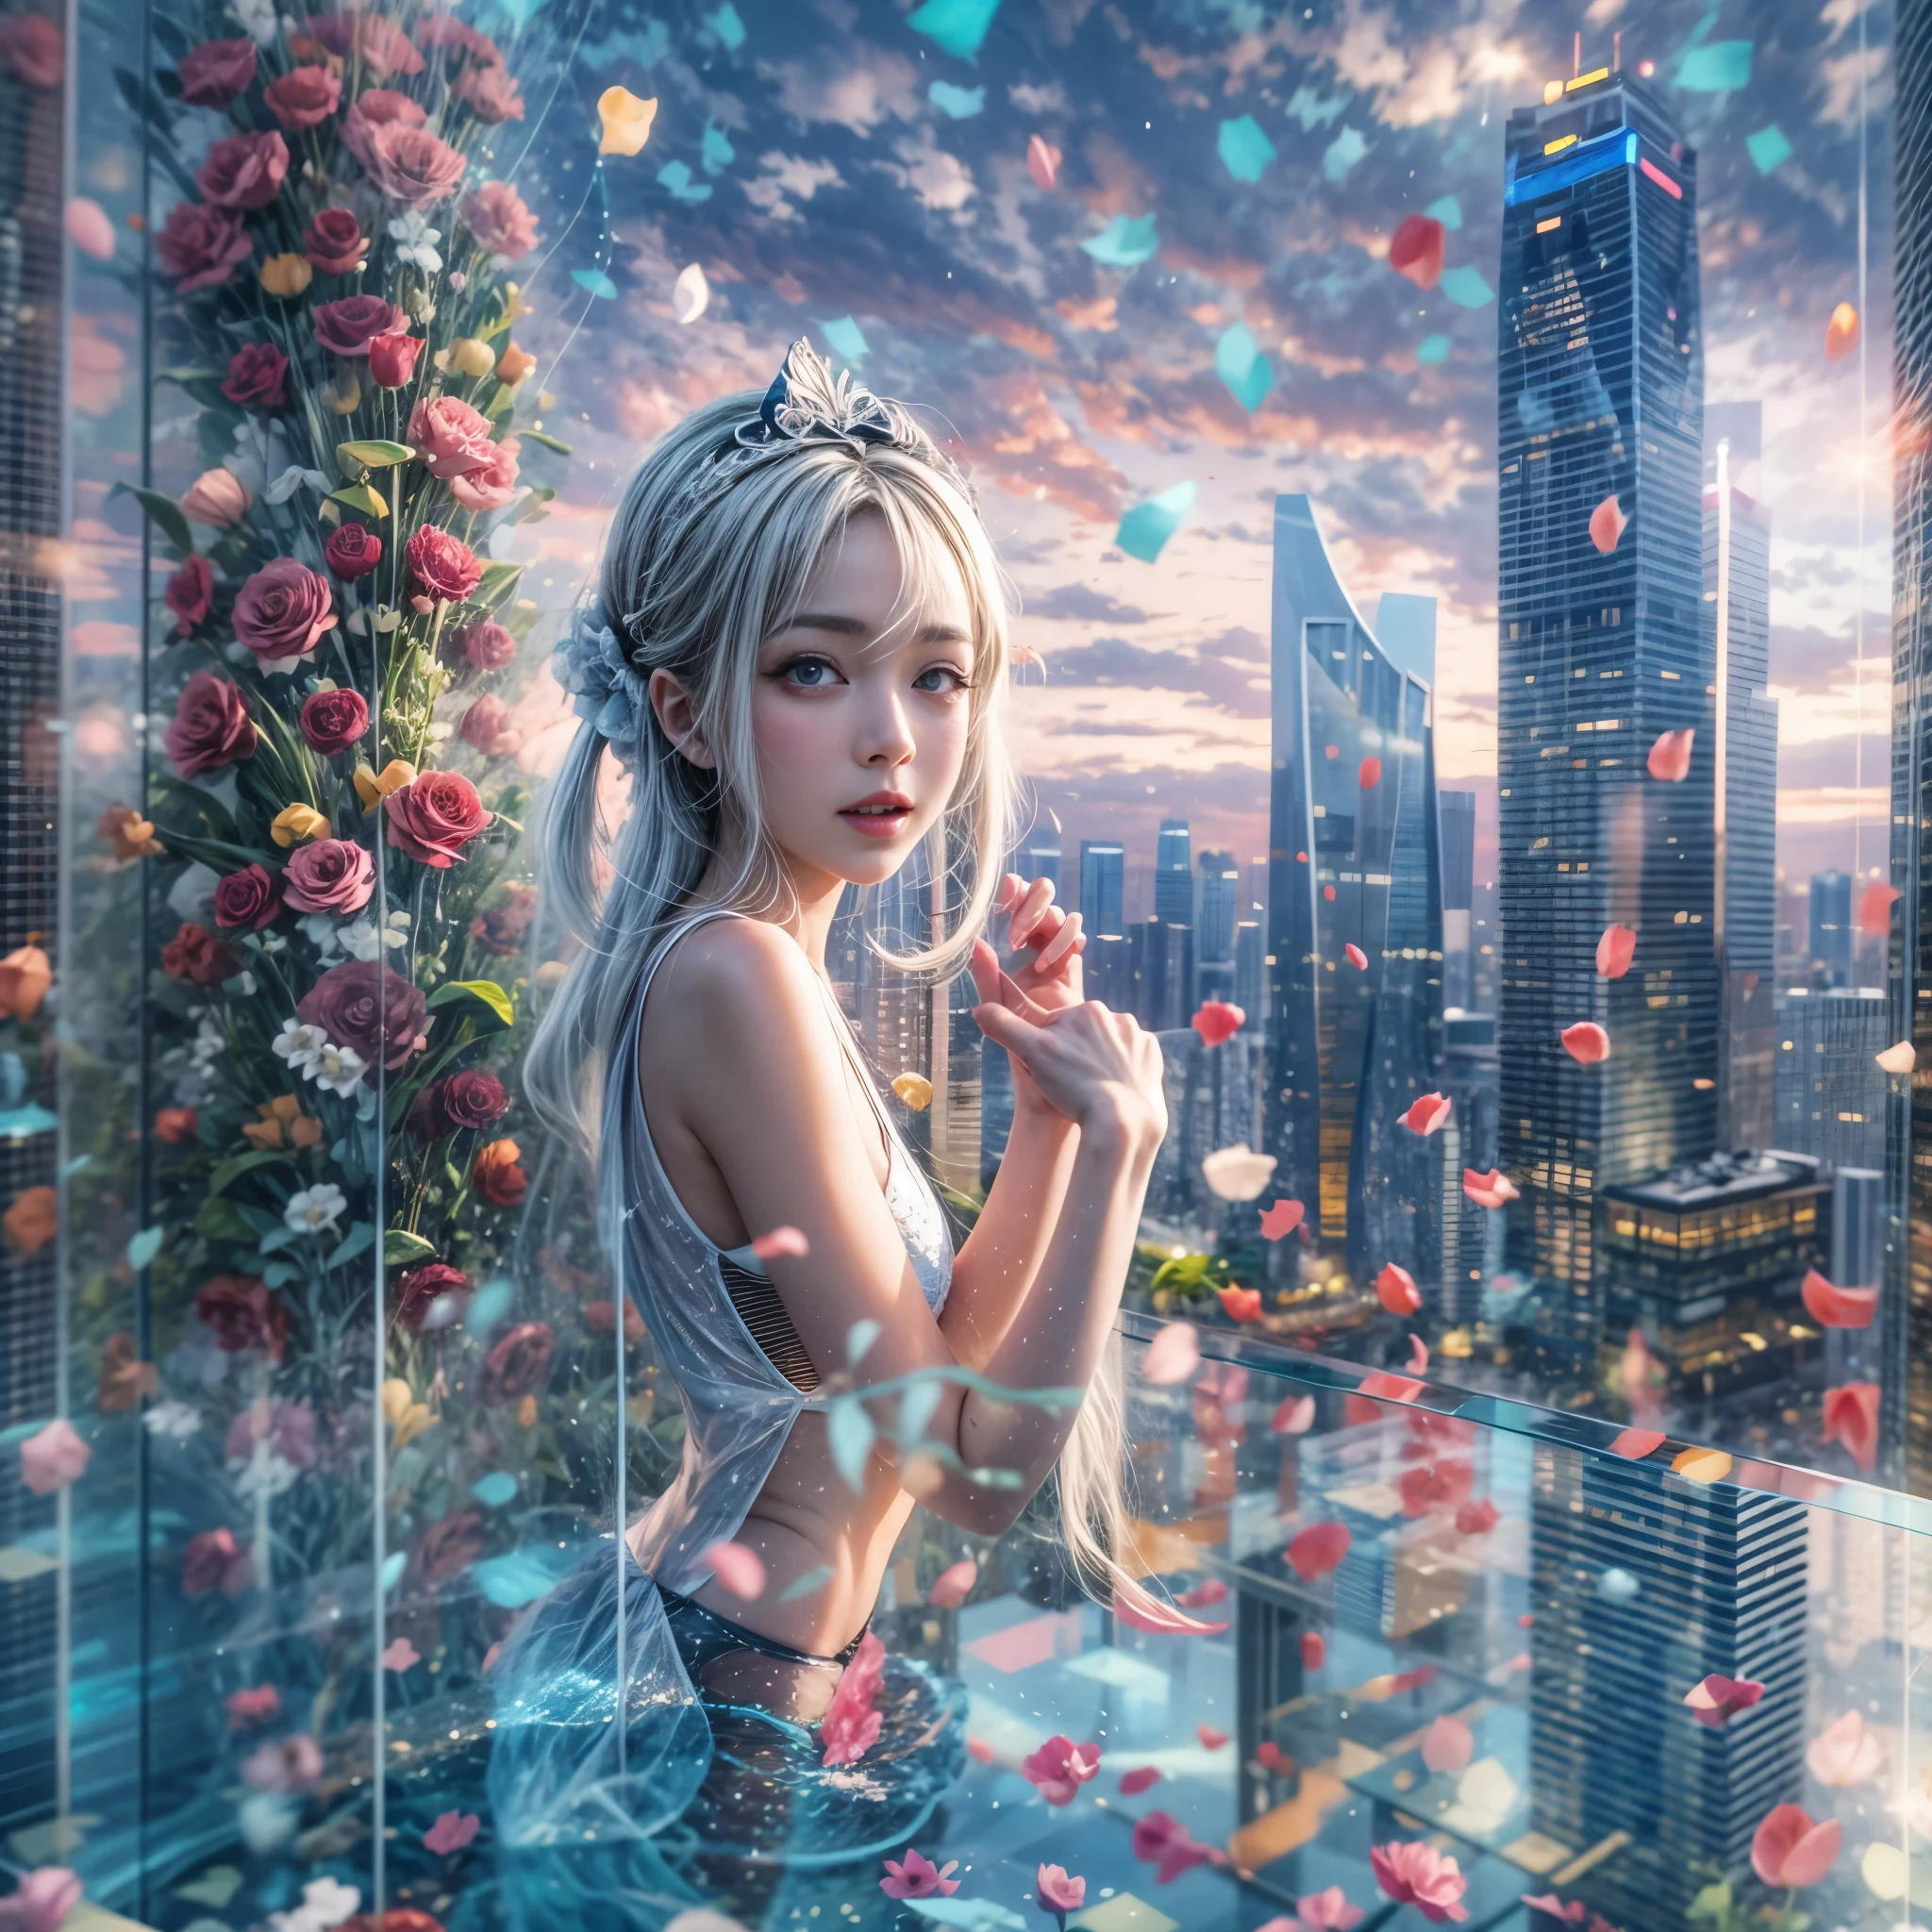 BloodRed, White in Pearly RainbowColors,ExtremelyDetailed(ProfessionalPhoto of Girl Floating in the Sky:1.37)ZoomLayer{Stunning|Mystic|GodRays|Haze}, (57th floor infinity pool:1.07) Tallest building in the urban forest. (Masterpiece 8K TopQuality:1.2)(ExtremelyDetailed NOGIZAKA face:1.37) ElaboratePupil with (SparklingHighlights:1.28) DoubleEyelids with Voluminous LongEyelashes PUNIPUNI RosyCheeks (Joyful Expressions LifeLike Rendering) MotionBlur  BREAK  (Acutance:0.77) PUNIPUNI Radiant Impeccable PearlSkin with Transparency White(Skinny SchoolSwimwear) {(HiddenHand)|((Corrected BabyLike Hand))} Whole Body Proportions and all limbs are Anatomically Accurate, {Carnation|Tulips|(Rose)} [FlowerWreath WrappedBody Full of Flowers Covering girl's body] {((Dazzling RainbowColorHorizon))|ColorfulSky|ColoredClouds|(Starly Particles)}(extra limbs:-1.4)(Not Detailed Face:-1.37)(Not Detailed Hand:-1.28), Drawing infinity pool reference to the rooftop of Marina Bay Sands